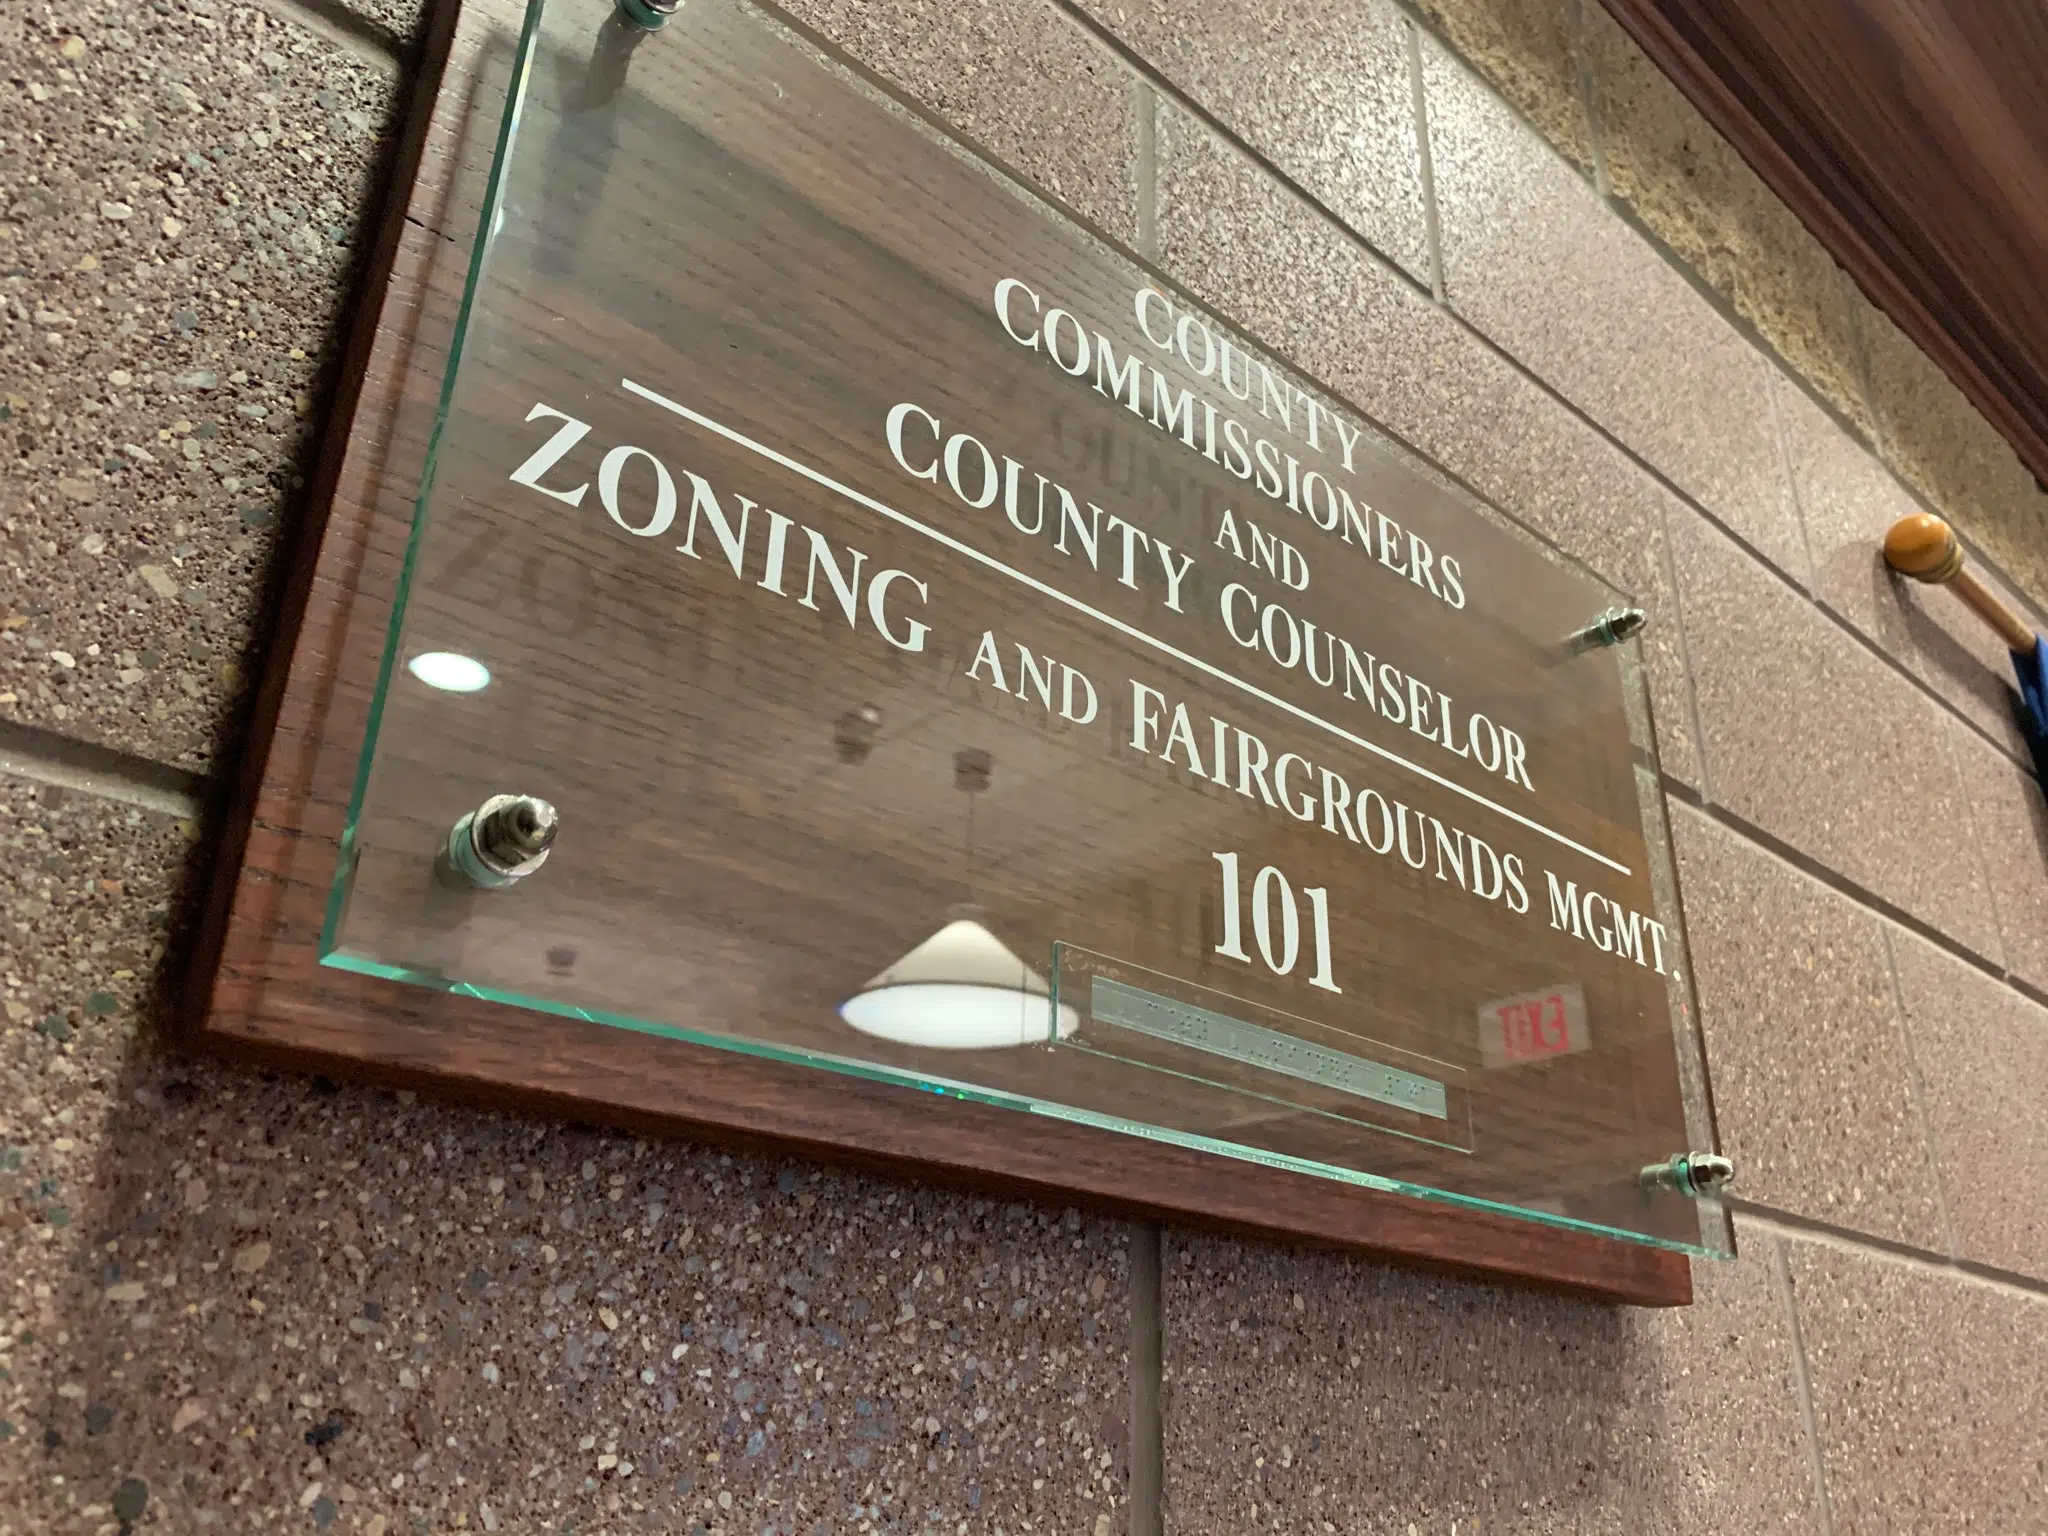 Infrastructure, financial transfers and township clerk vacancy all see action during Lyon County Commission meeting Thursday